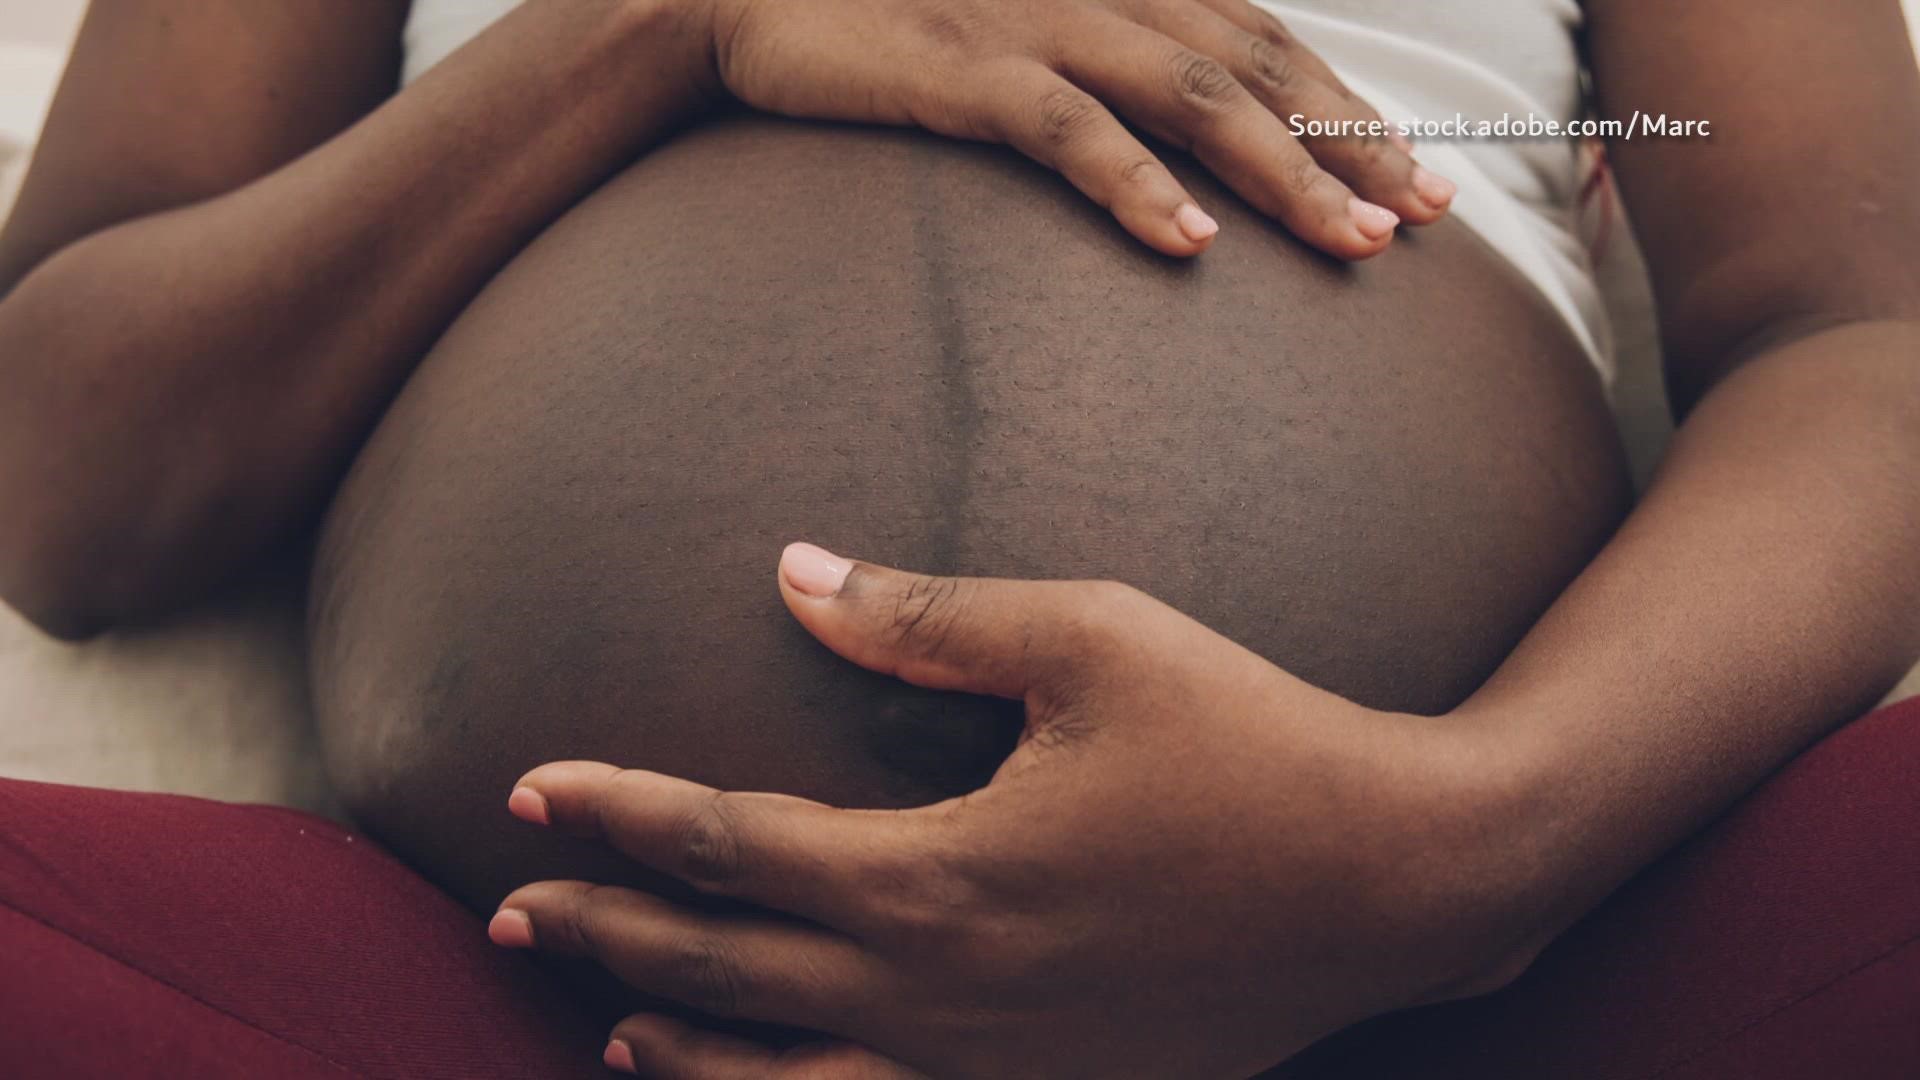 NC A&T and UNC awarded millions in research dollars to improve pregnancy outcomes in Black women.